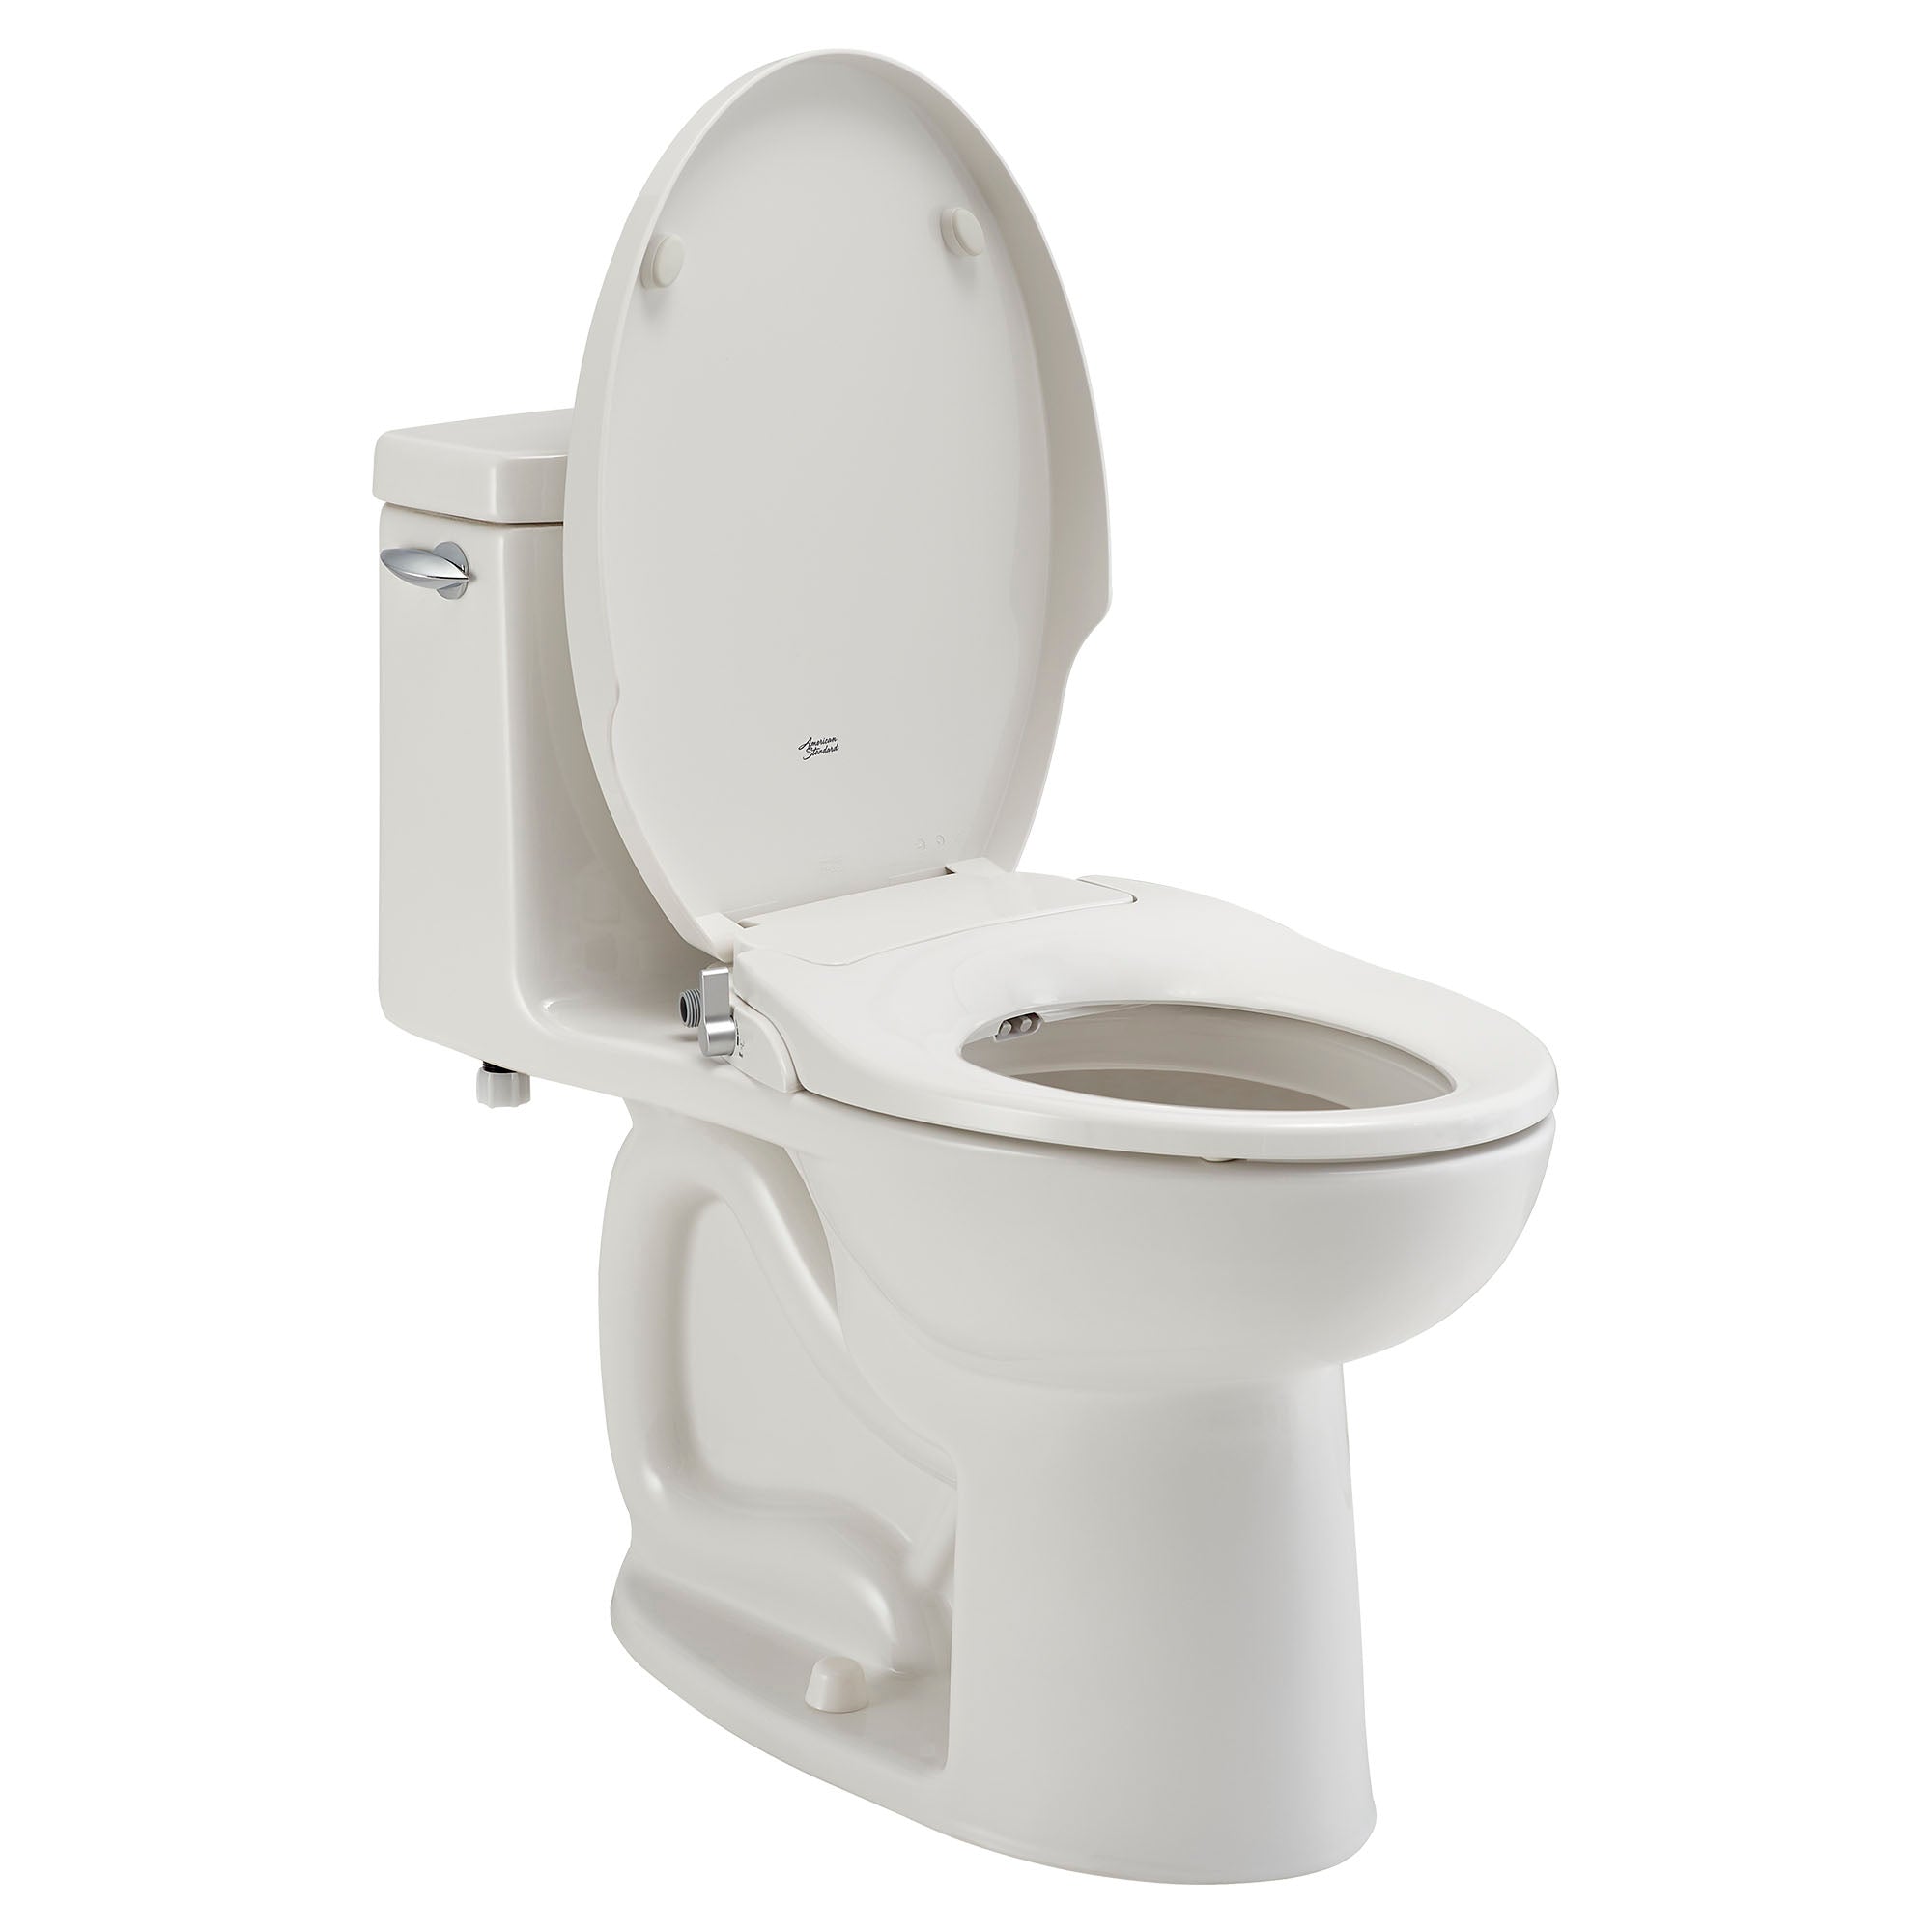 American Standard AquaWash® 1.0 Non-Electric SpaLet® Bidet Seat With Manual Operation